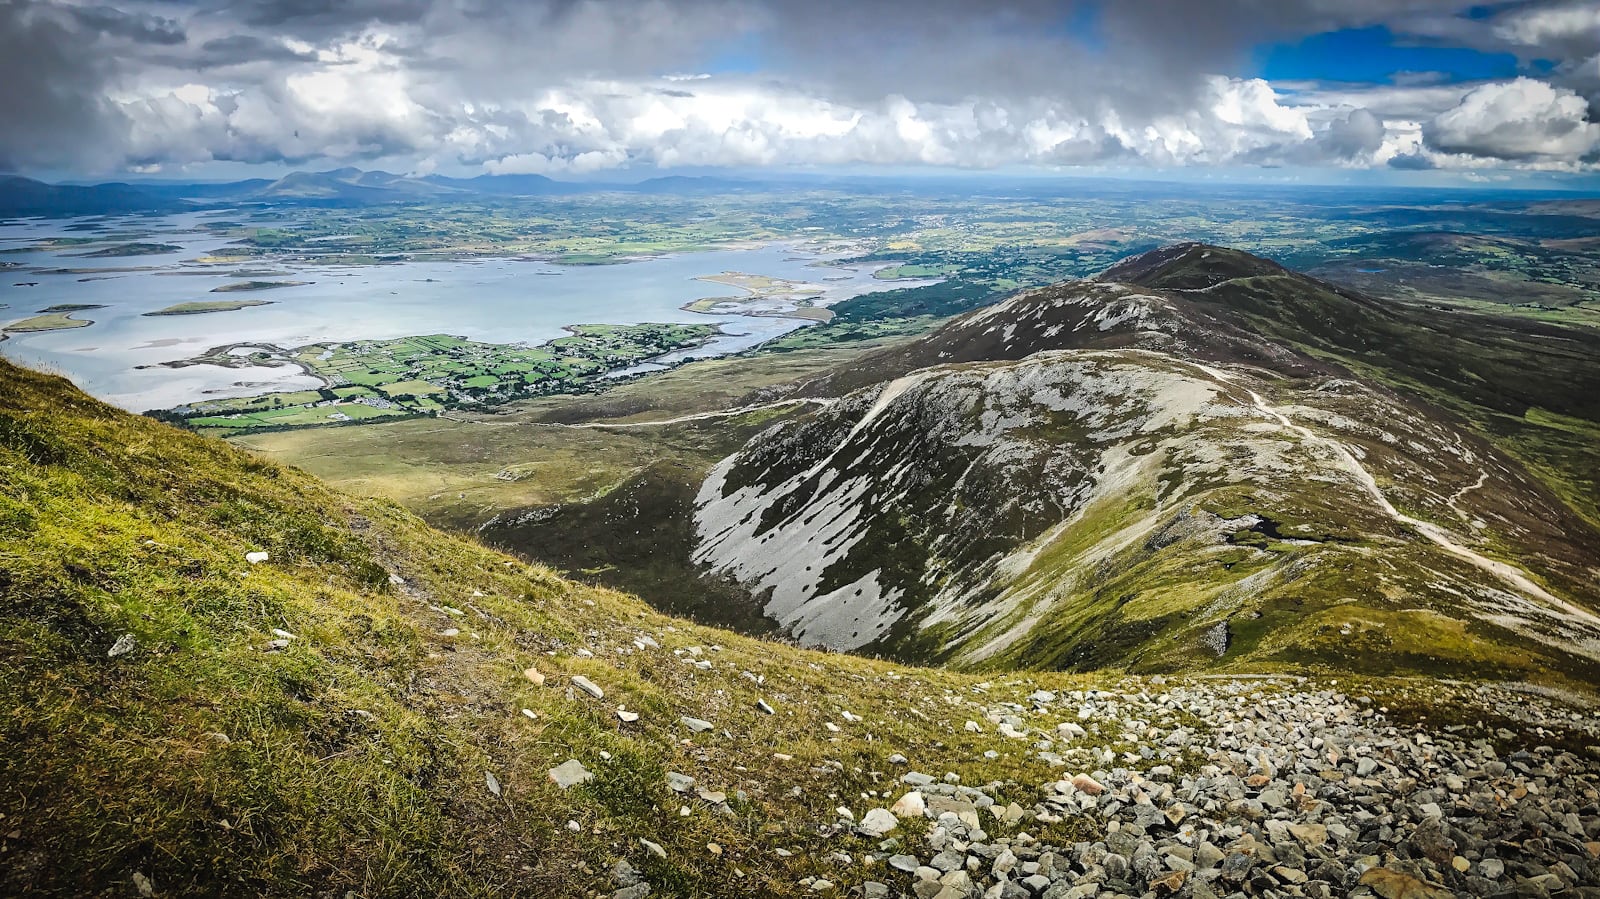 View from Croagh Patrick